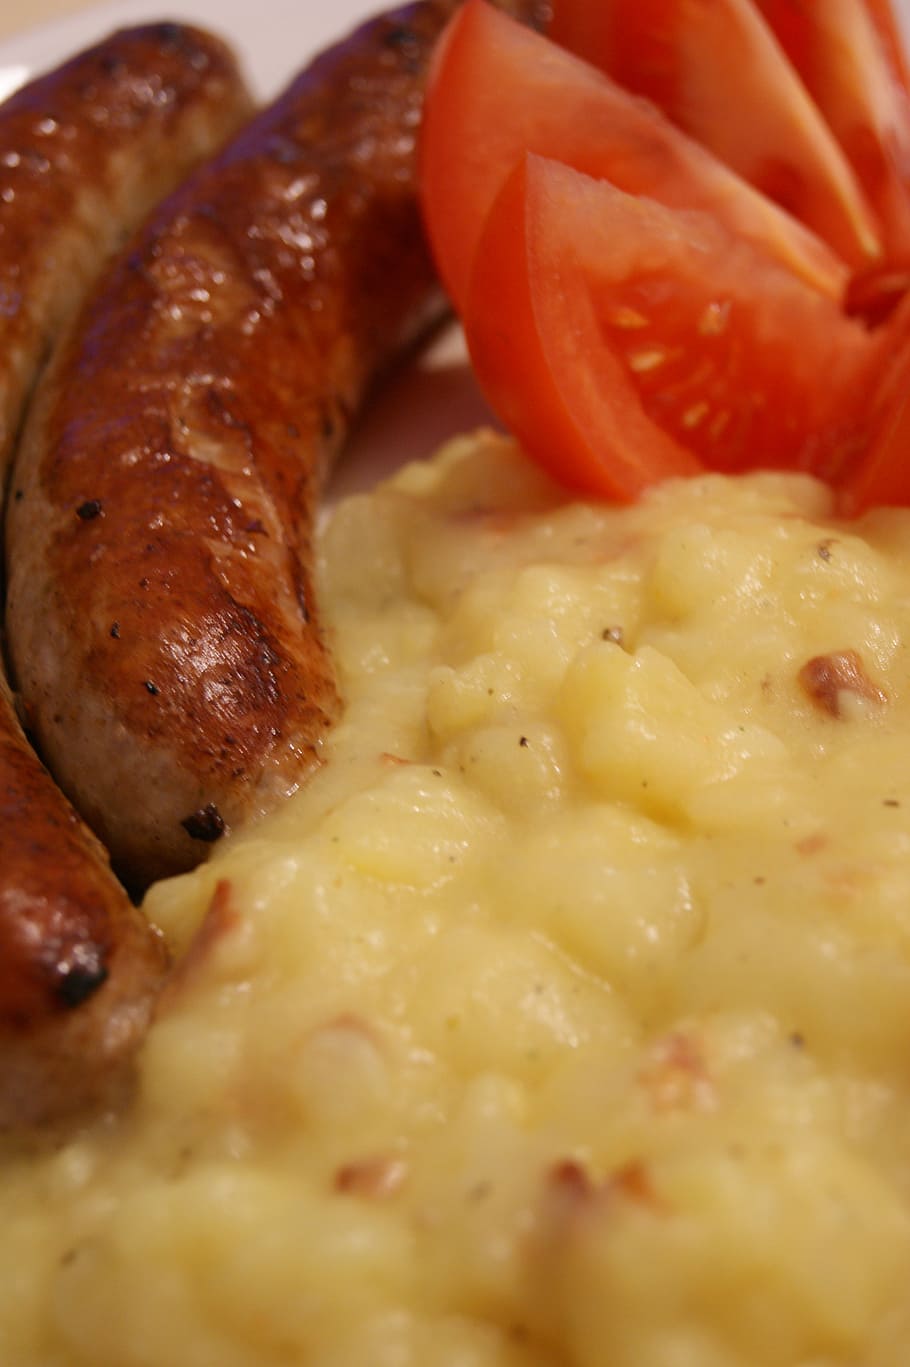 bratwurst, potatoes, salad, tomatoes, bacon, eat, food, food and drink, close-up, ready-to-eat